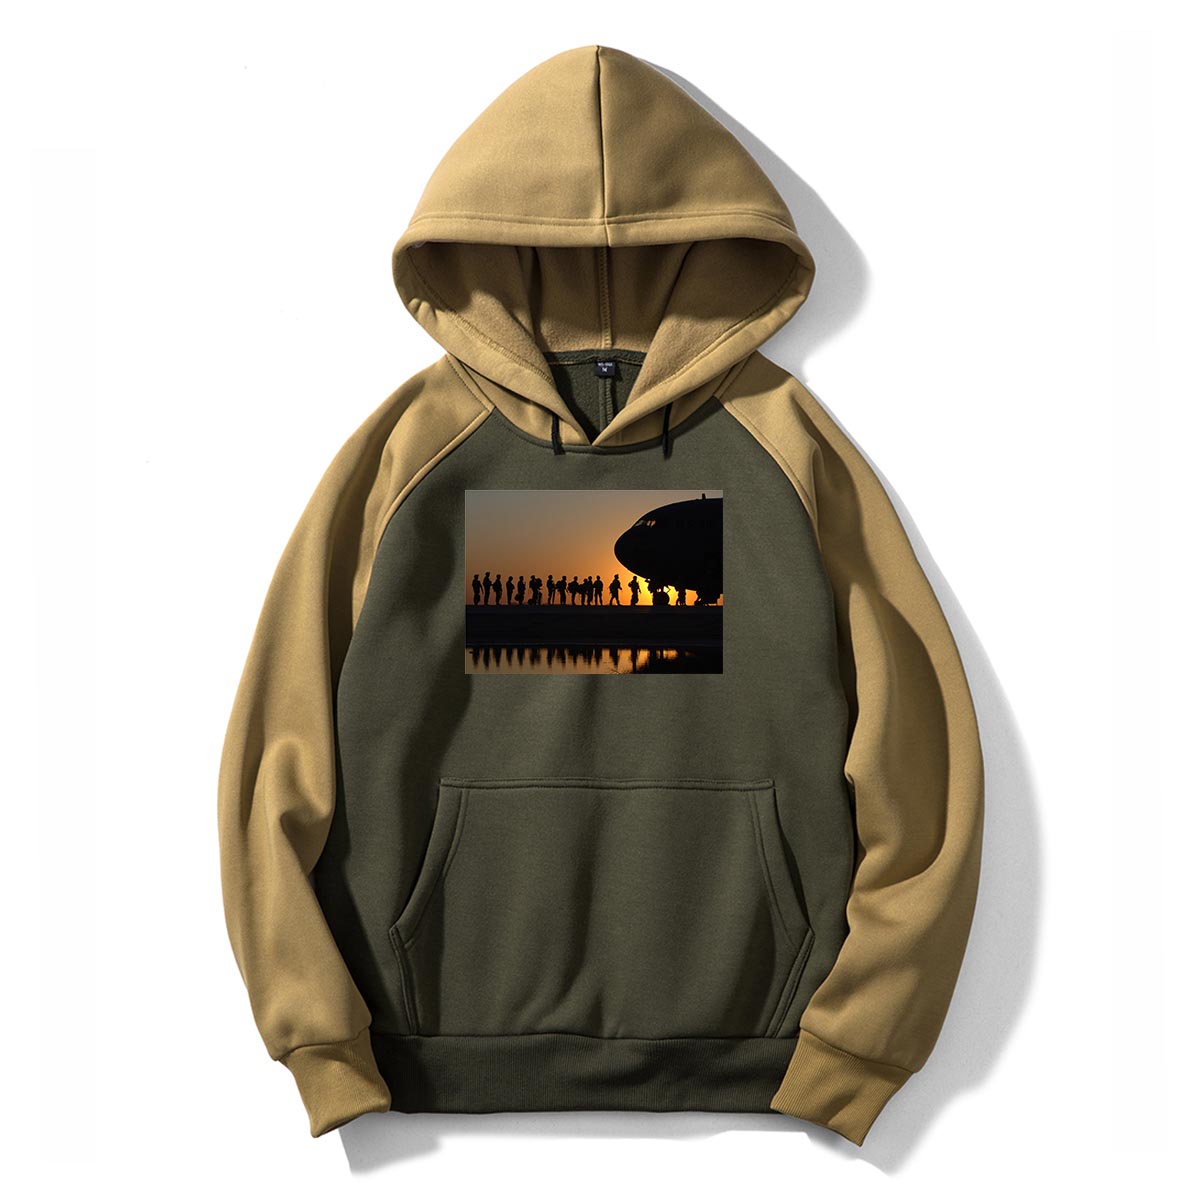 Band of Brothers Theme Soldiers Designed Colourful Hoodies